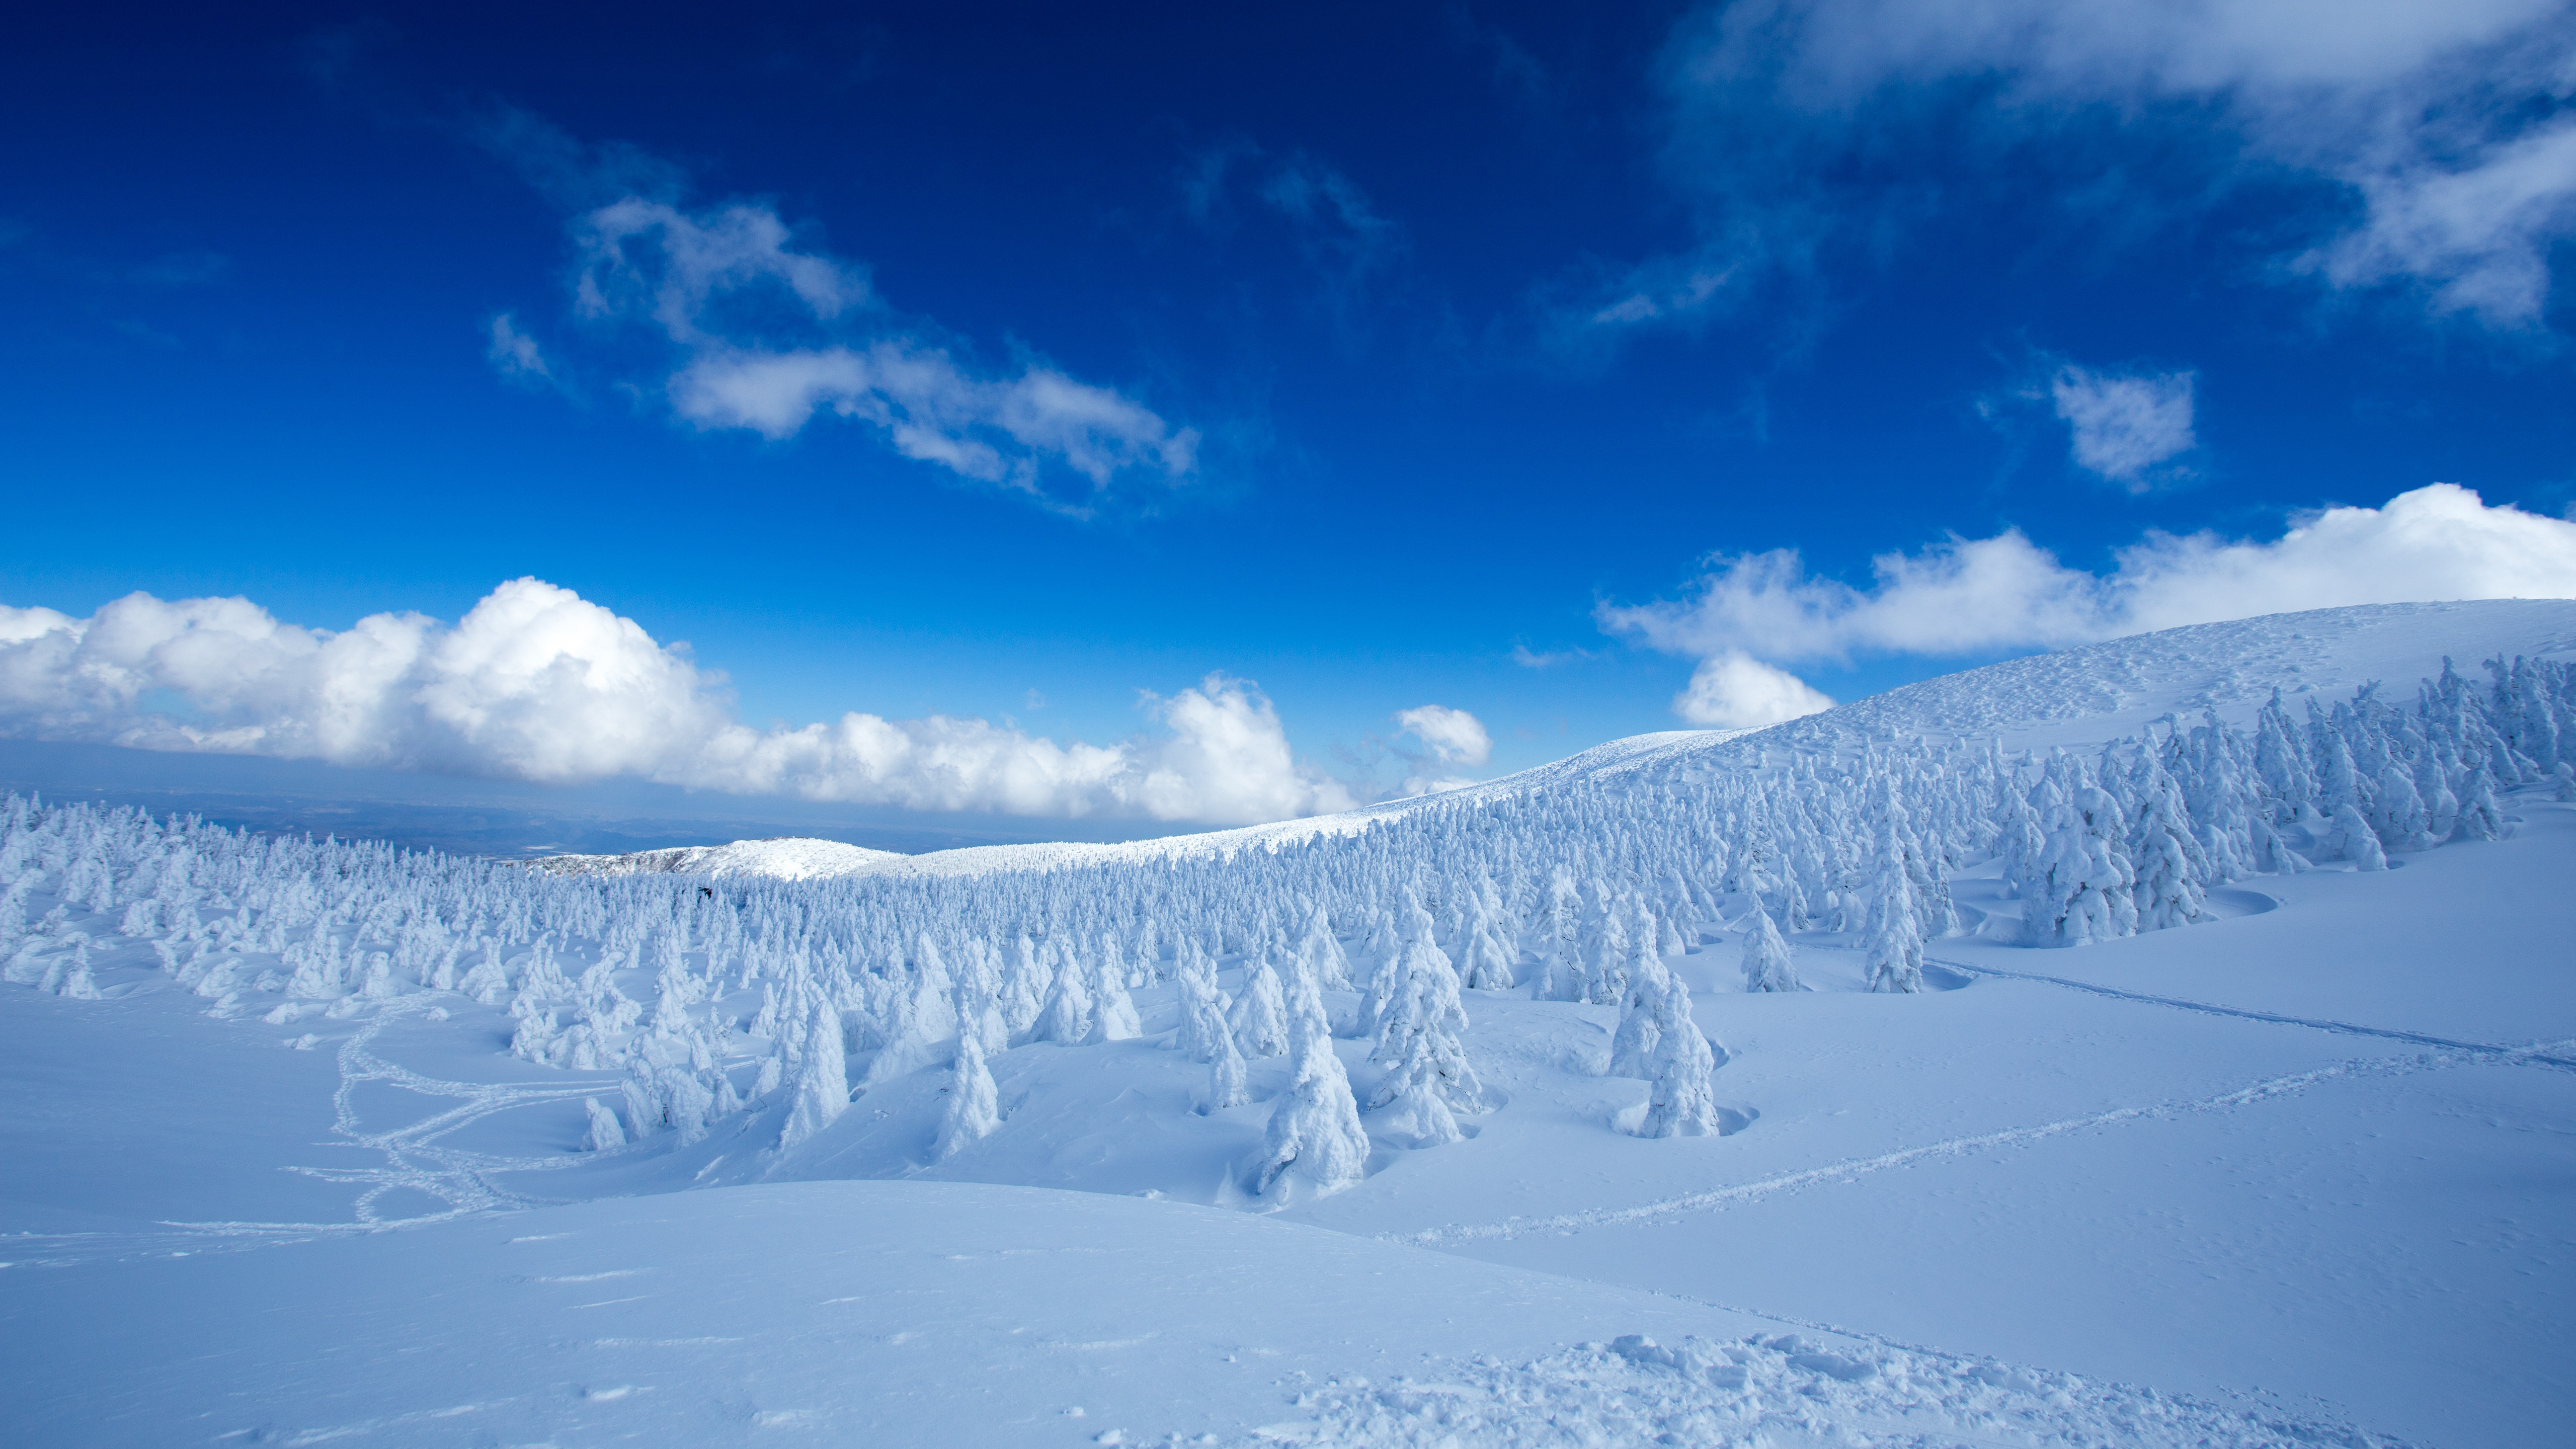 Landscape Of Snow Covered Pine Trees In Snow Field Forest Under Blue Cloudy Sky 4K 5K HD Nature Wallpapers